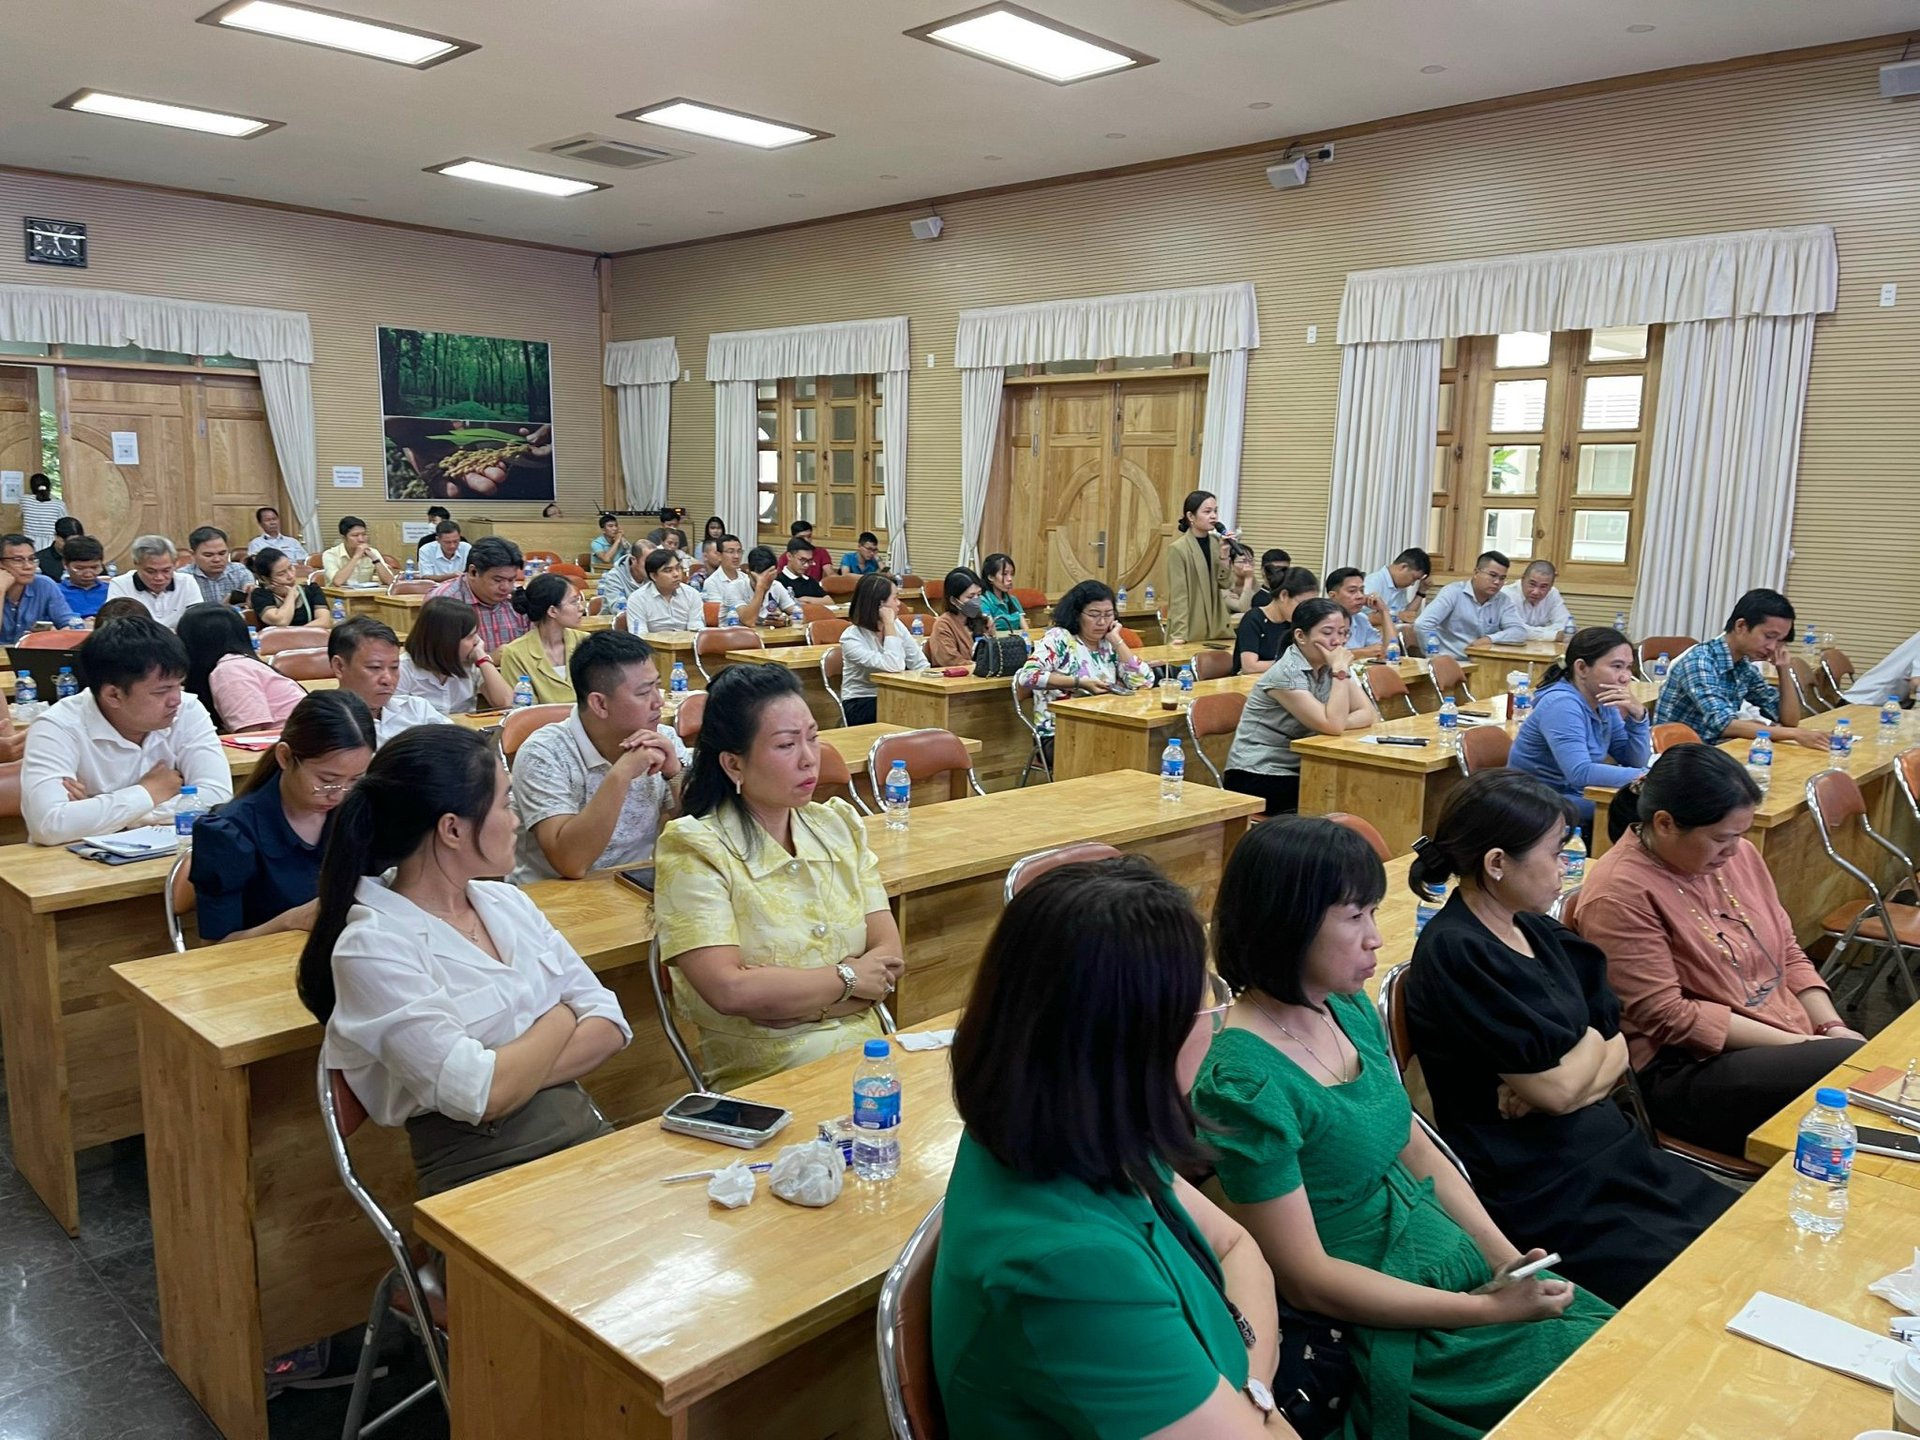 The conference attracted a large number of agricultural import and export businesses. Photo: Duc Trung.